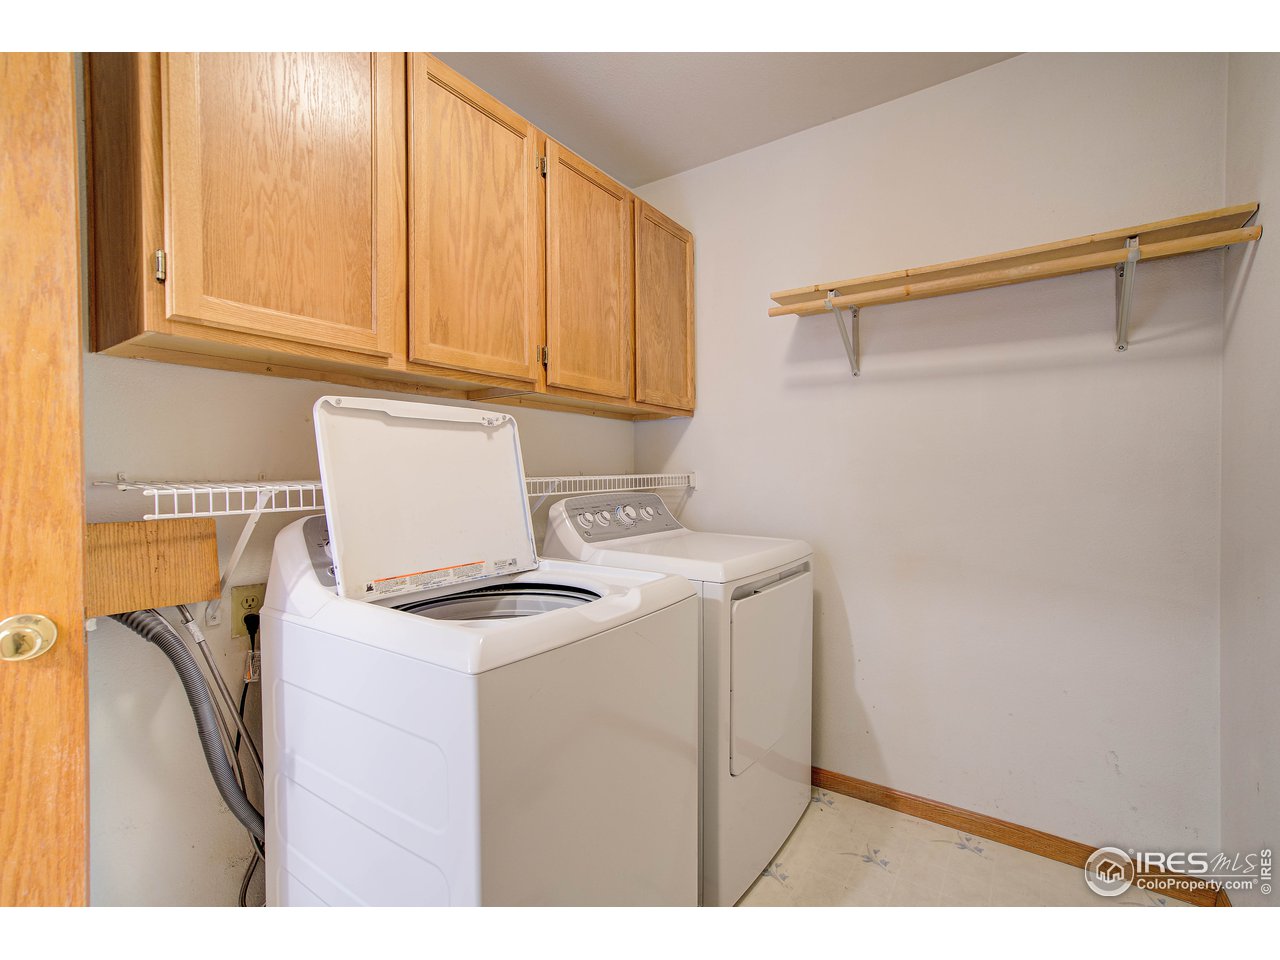 Main level laundry, washer and dryer Included! 